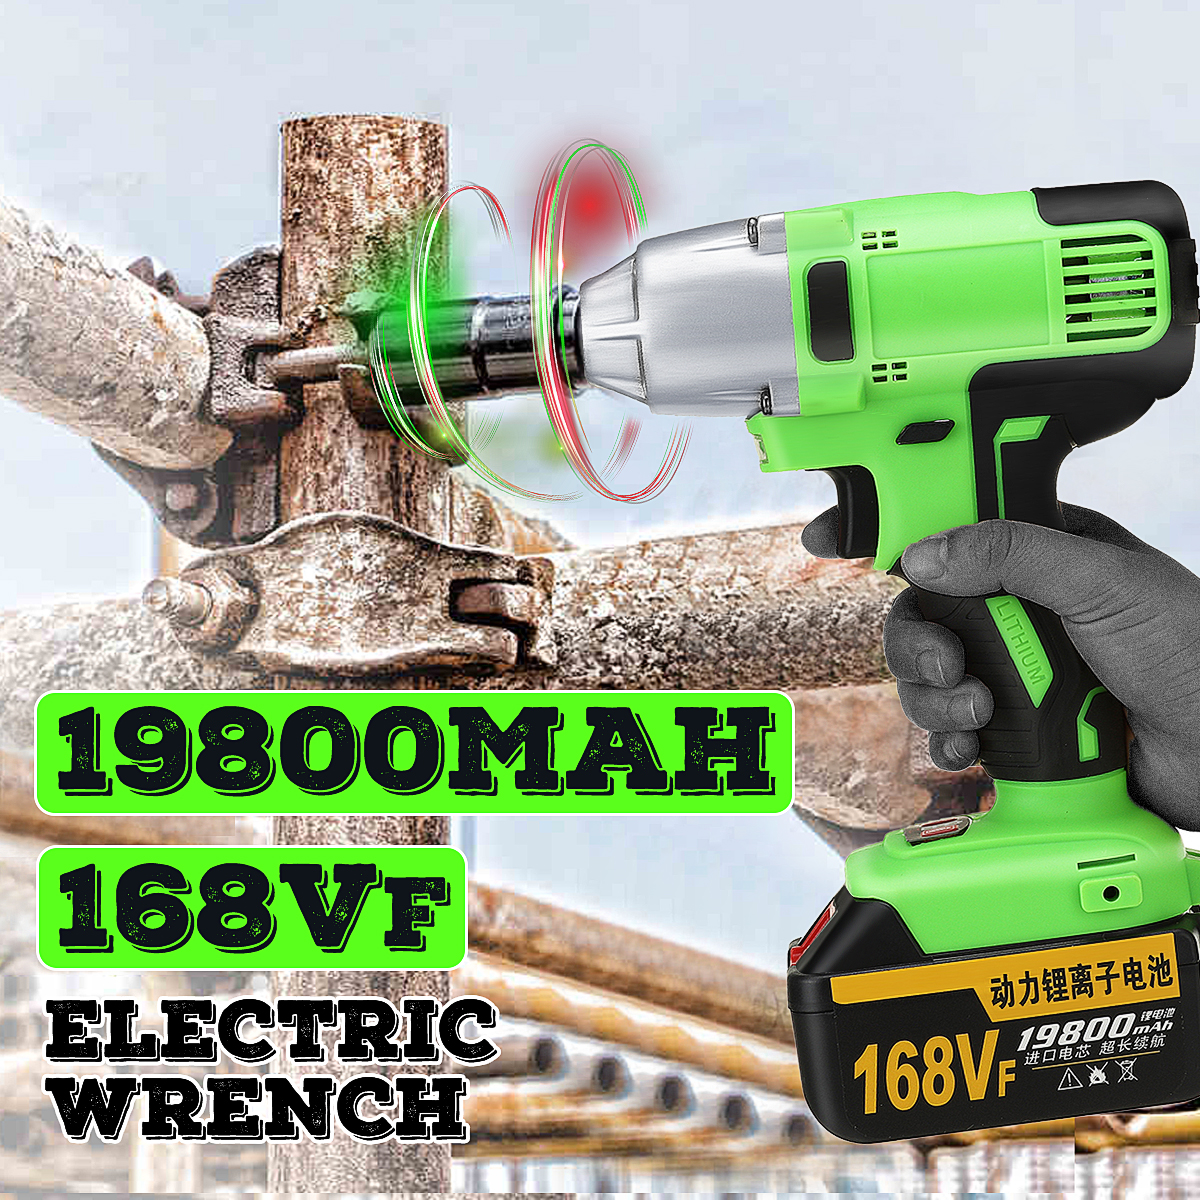 168VF-19800mAh-330NM-Electric-Impact-Wrench-Li-ion-Battery-Rechargeable-Power-Tool-1704614-2